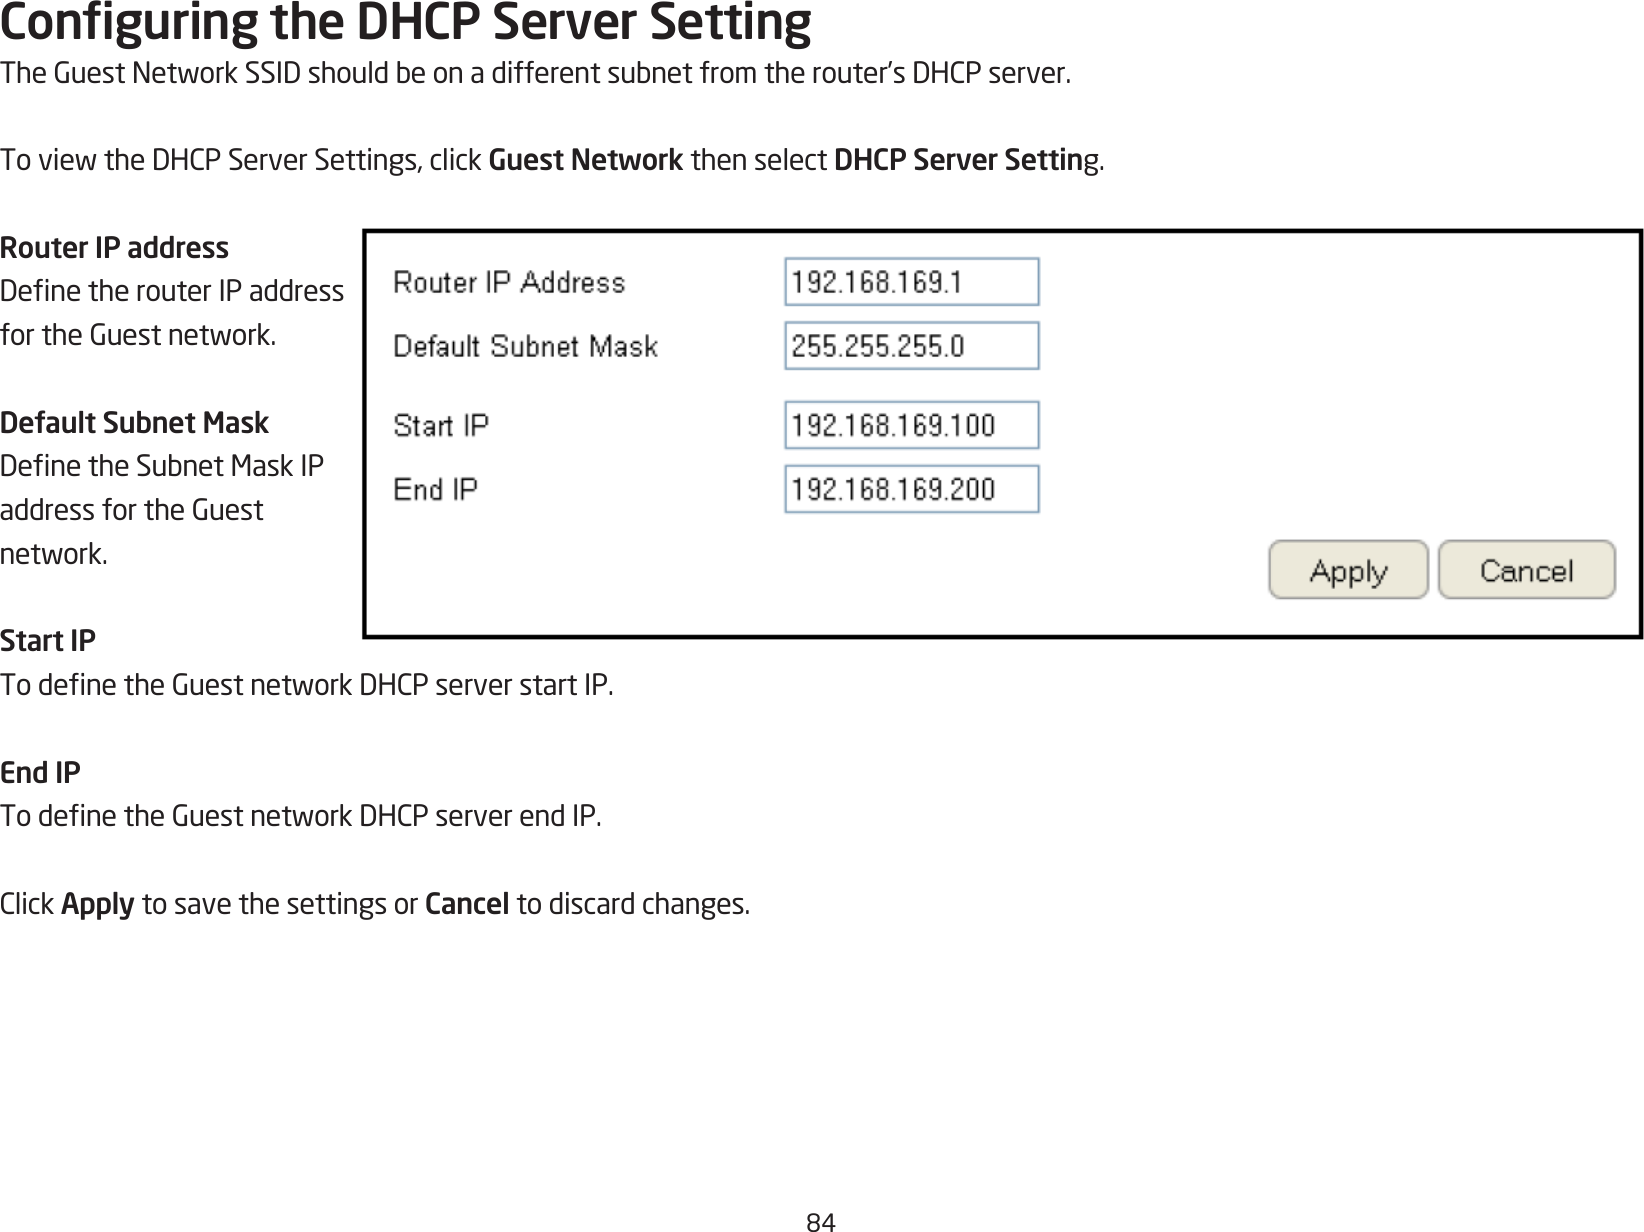 84Conguring the DHCP Server SettingTheGuestNetworkSSIDshouldbeonadifferentsubnetfromtherouter’sDHCPserver.ToviewtheDHCPServerSettings,clickGuest Network then select DHCP Server Setting.Router IP addressDenetherouterIPaddressfortheGuestnetwork.Default Subnet MaskDenetheSubnetMaskIPaddressfortheGuestnetwork.Start IPTodenetheGuestnetworkDHCPserverstartIP.End IPTodenetheGuestnetworkDHCPserverendIP.ClickApply to save the settings or Cancel to discard changes.